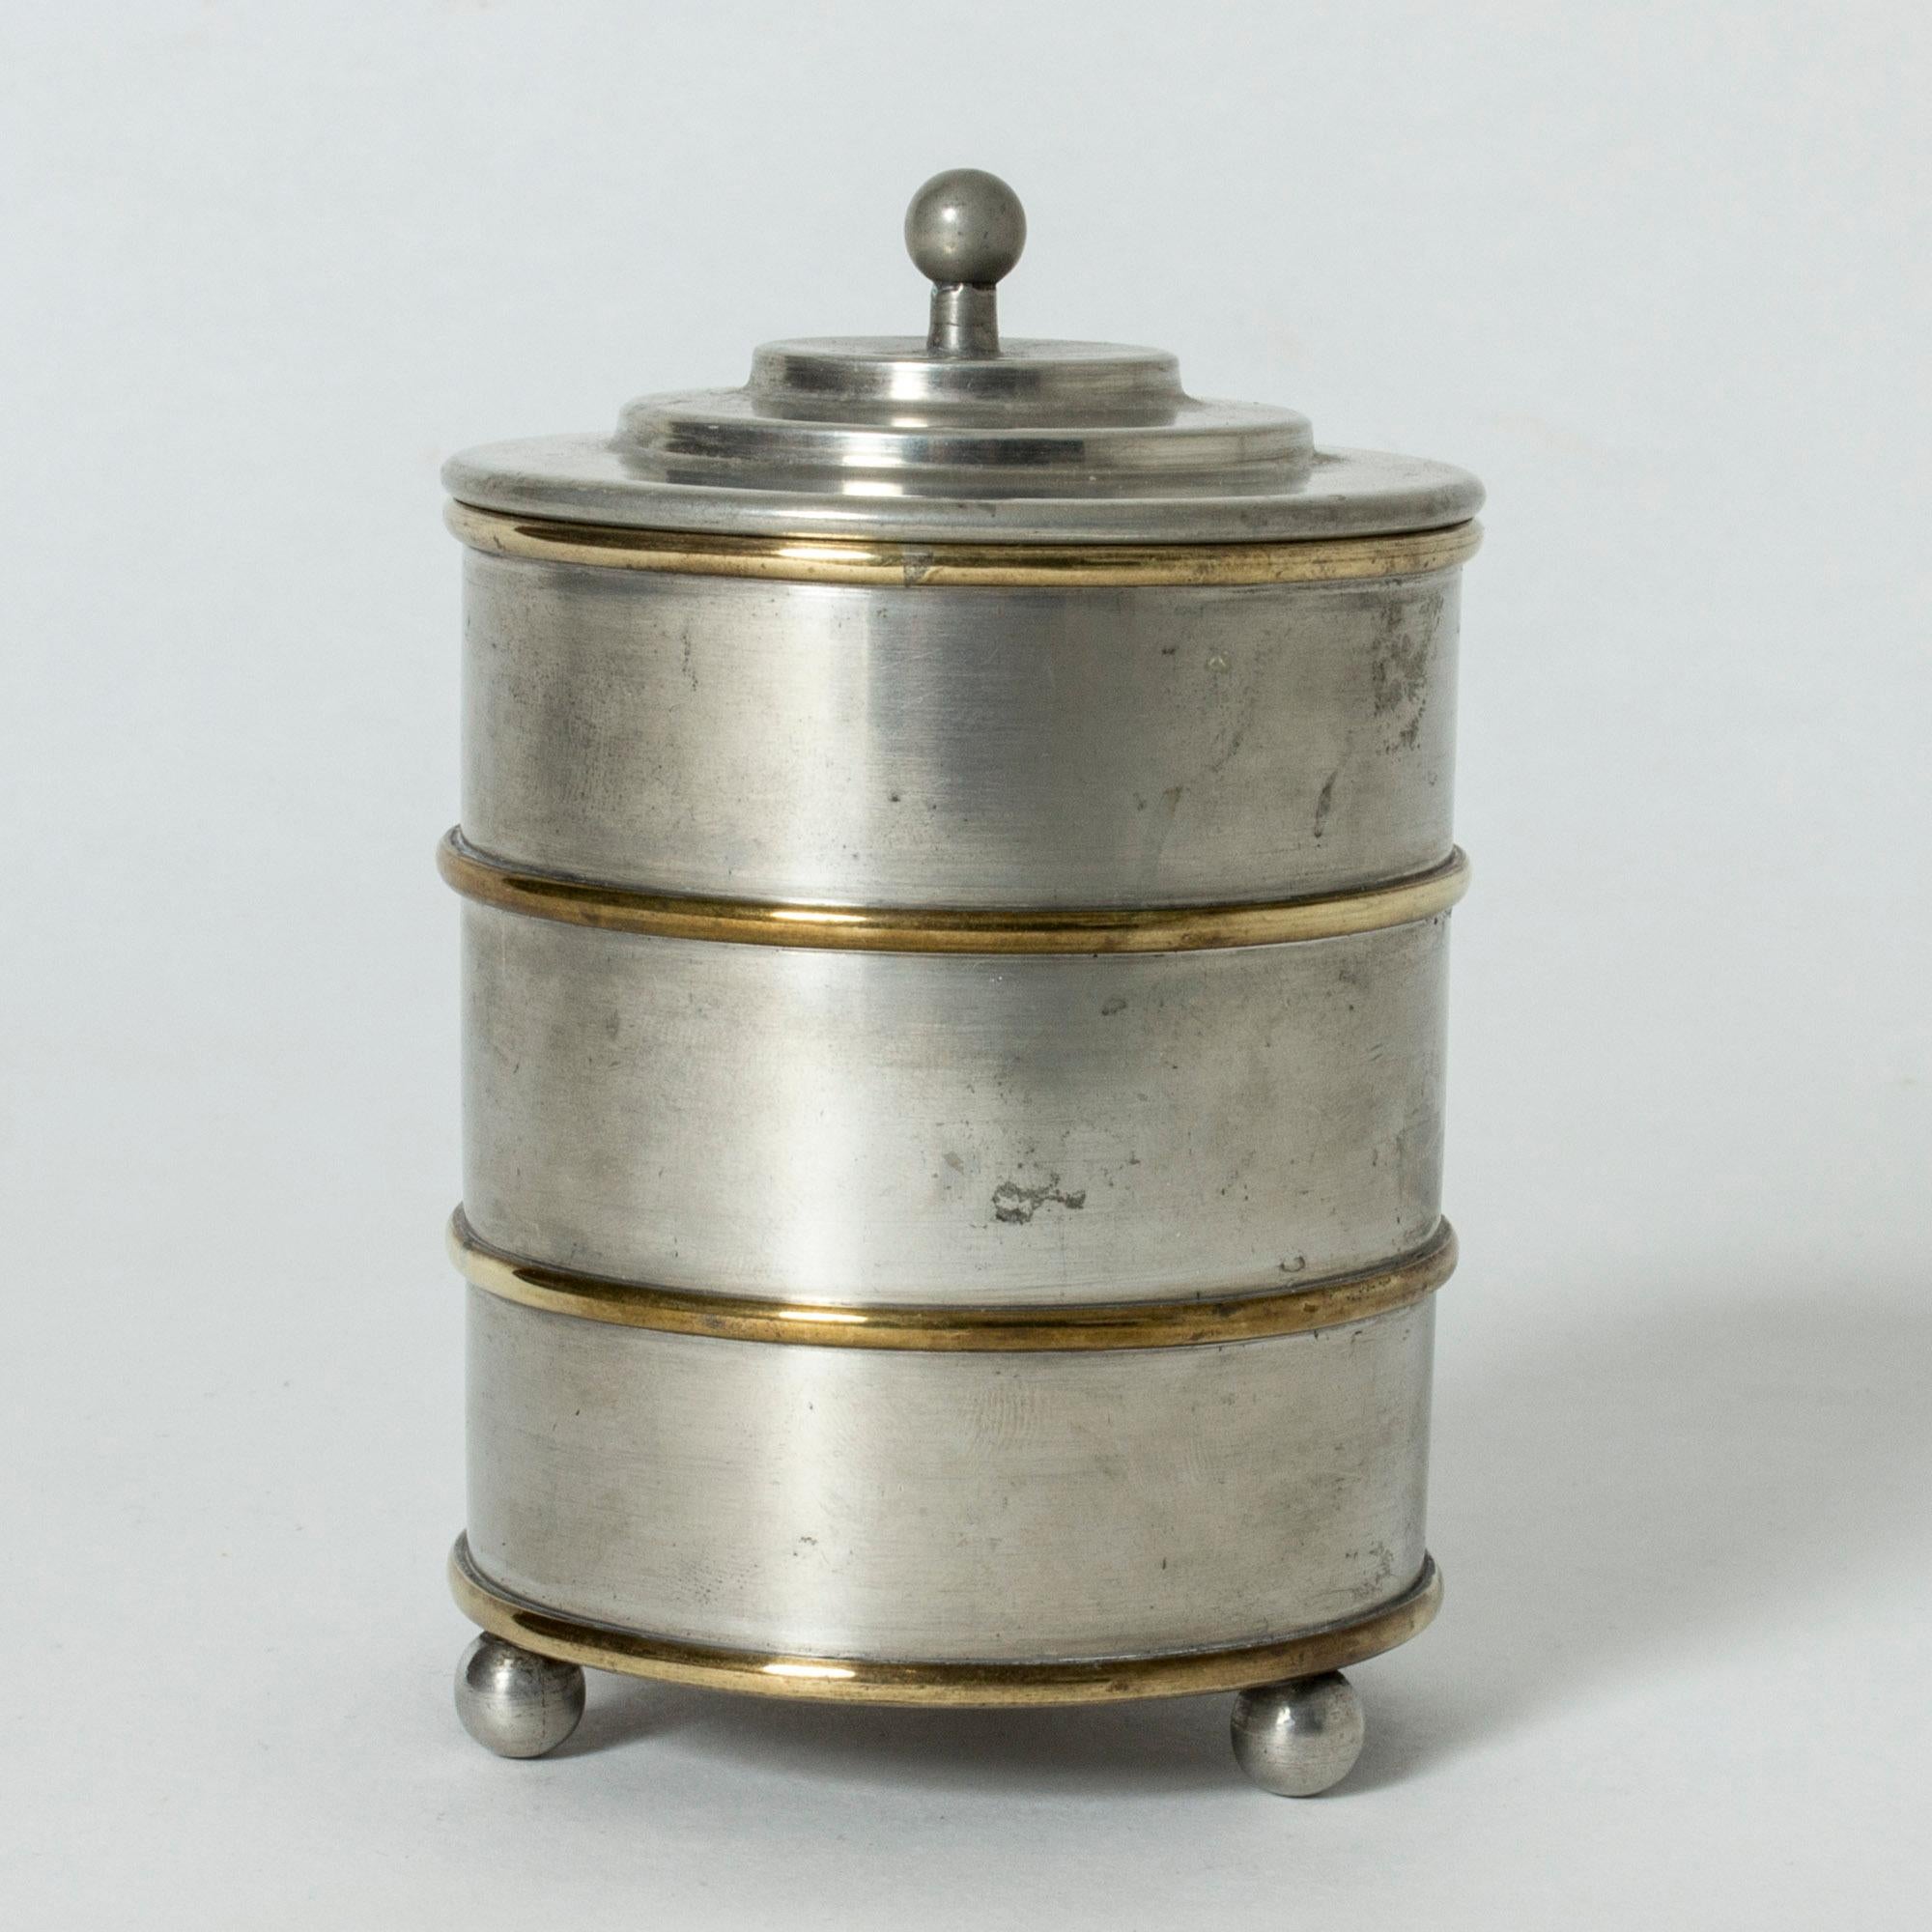 Beautiful pewter jar from Herman Bergman, with ball fett and a small round knob on the lid. Decorative, contrasting, horizontal brass stripes.